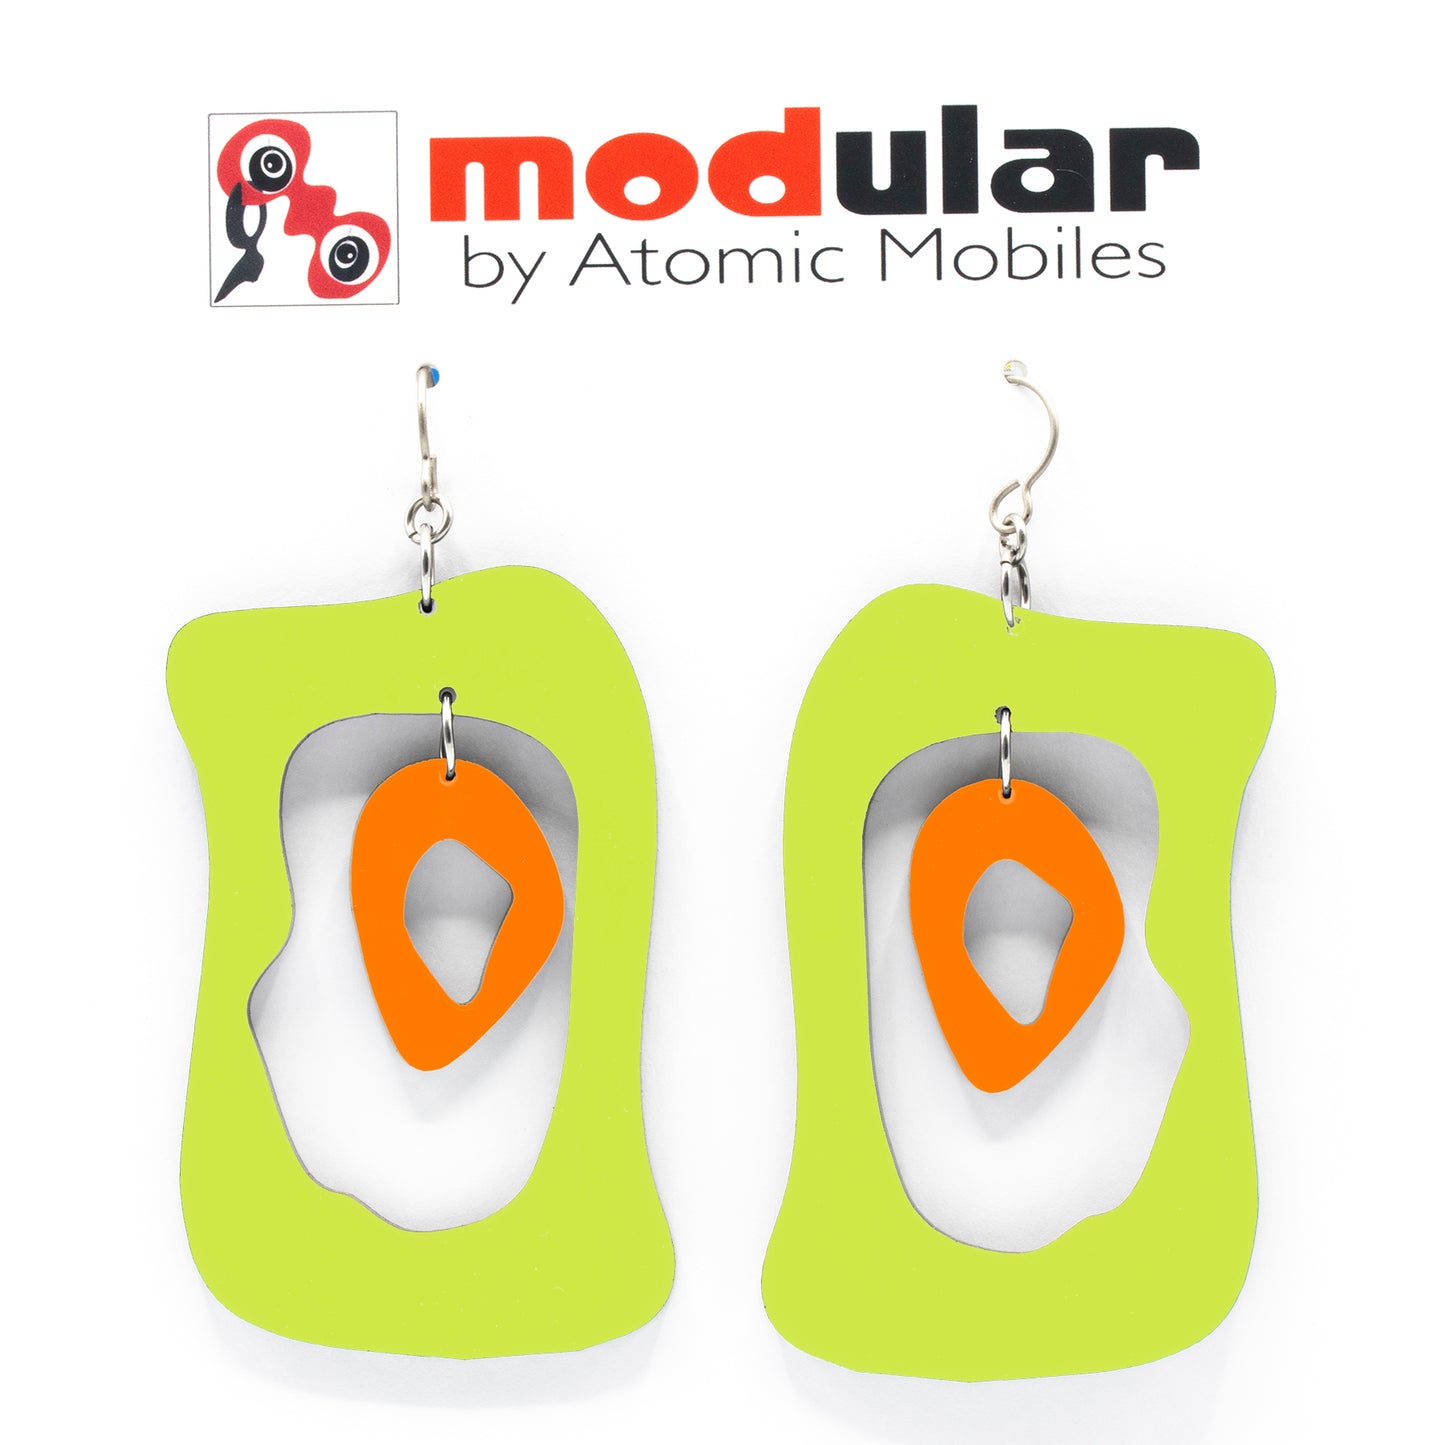 MODular Earrings - Modern Bliss Statement Earrings in Lime and Orange by AtomicMobiles.com - retro era inspired mod handmade jewelry